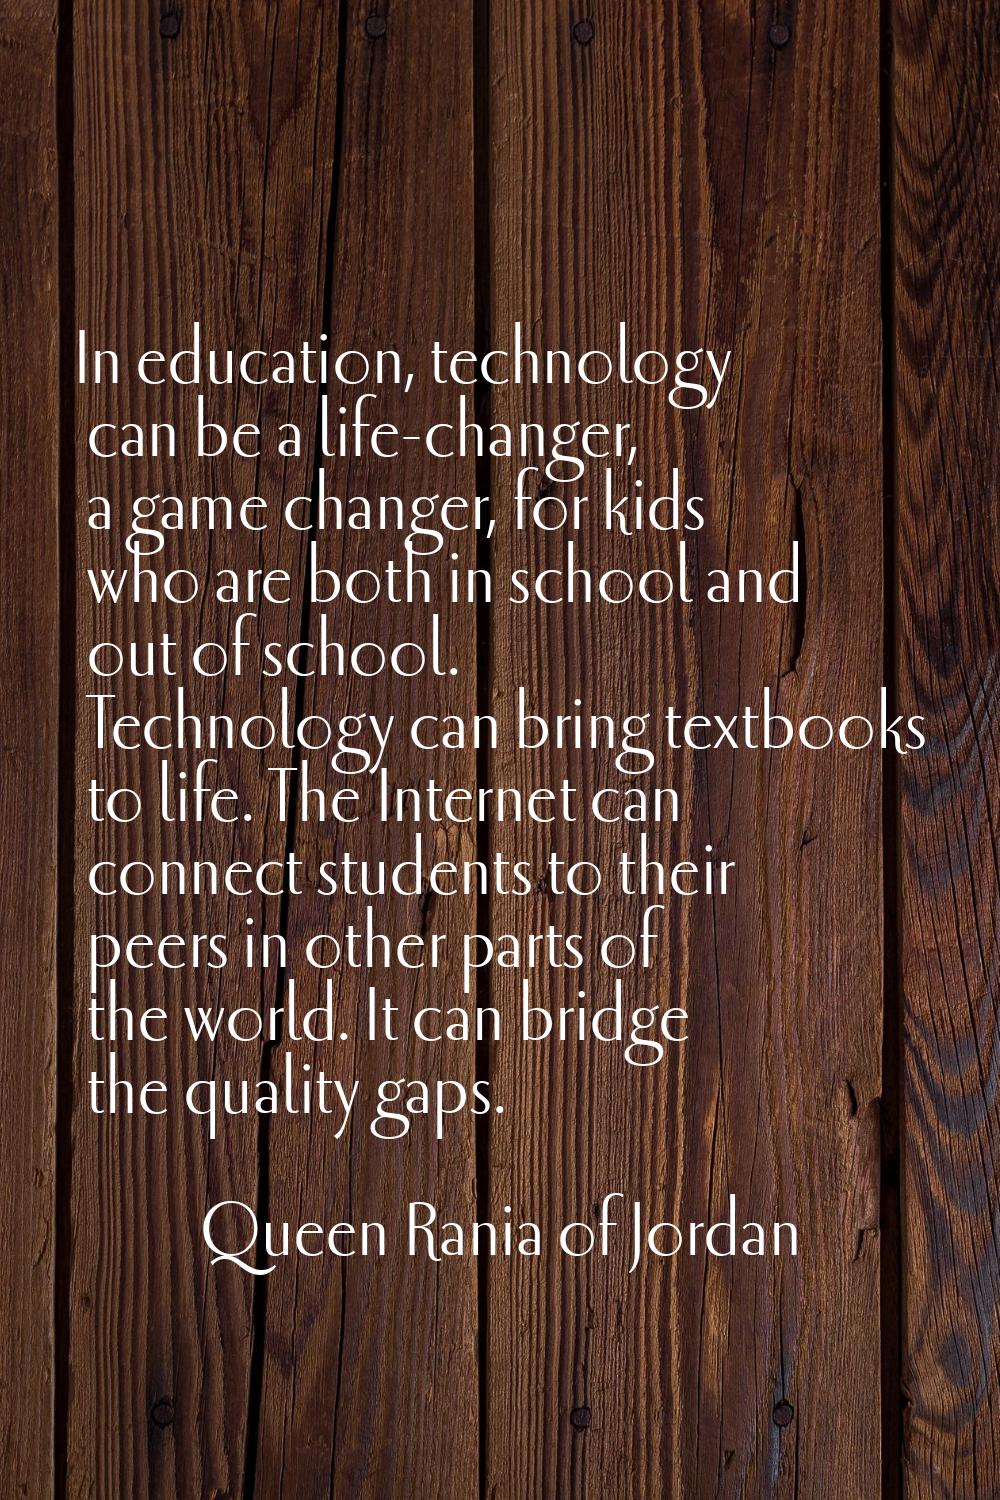 In education, technology can be a life-changer, a game changer, for kids who are both in school and